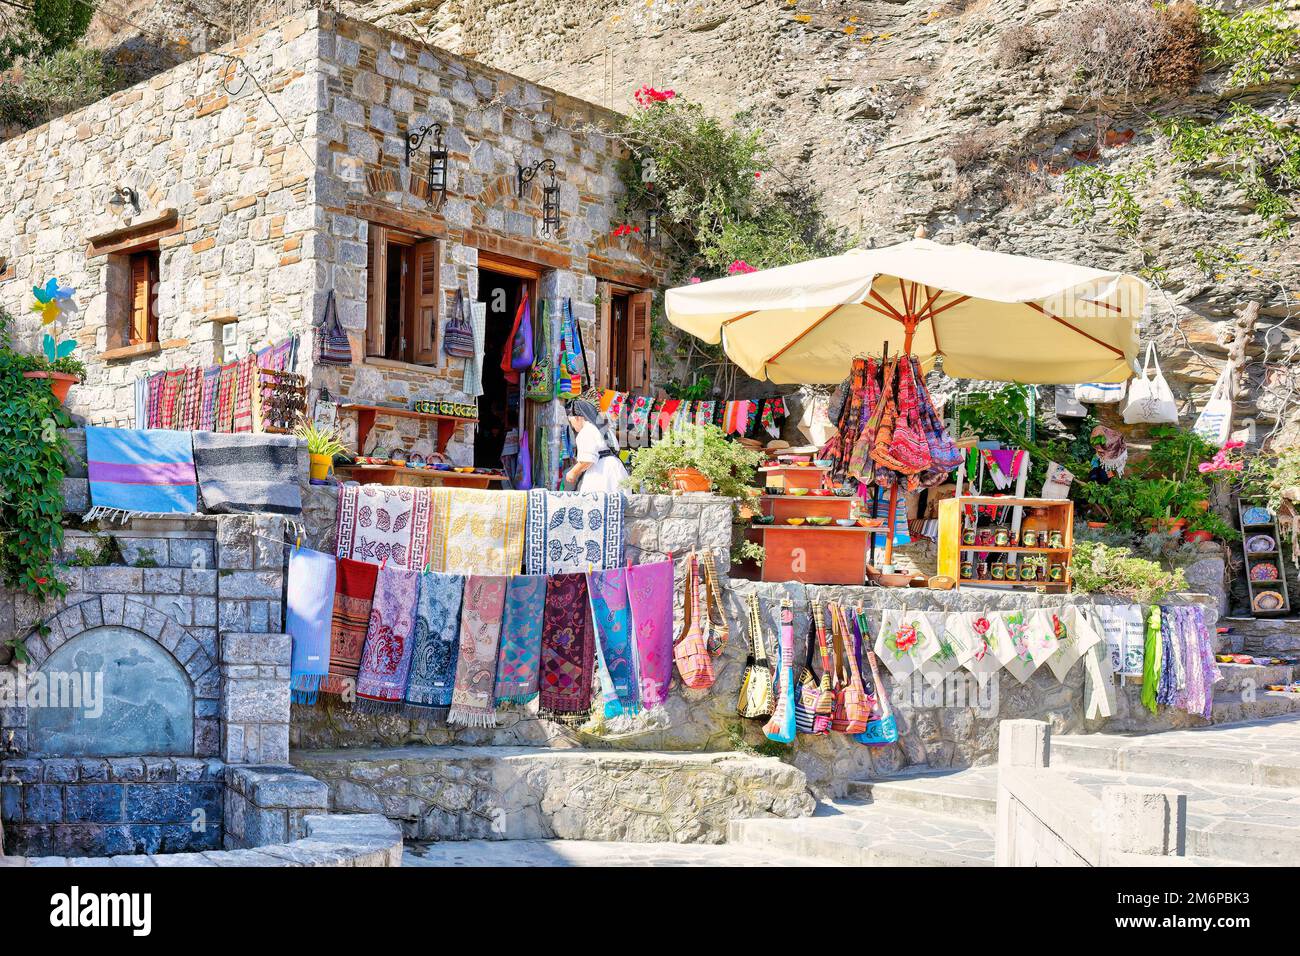 An old woman selling traditional handcrafts at the village Olympos in Karpathos, Greece Stock Photo